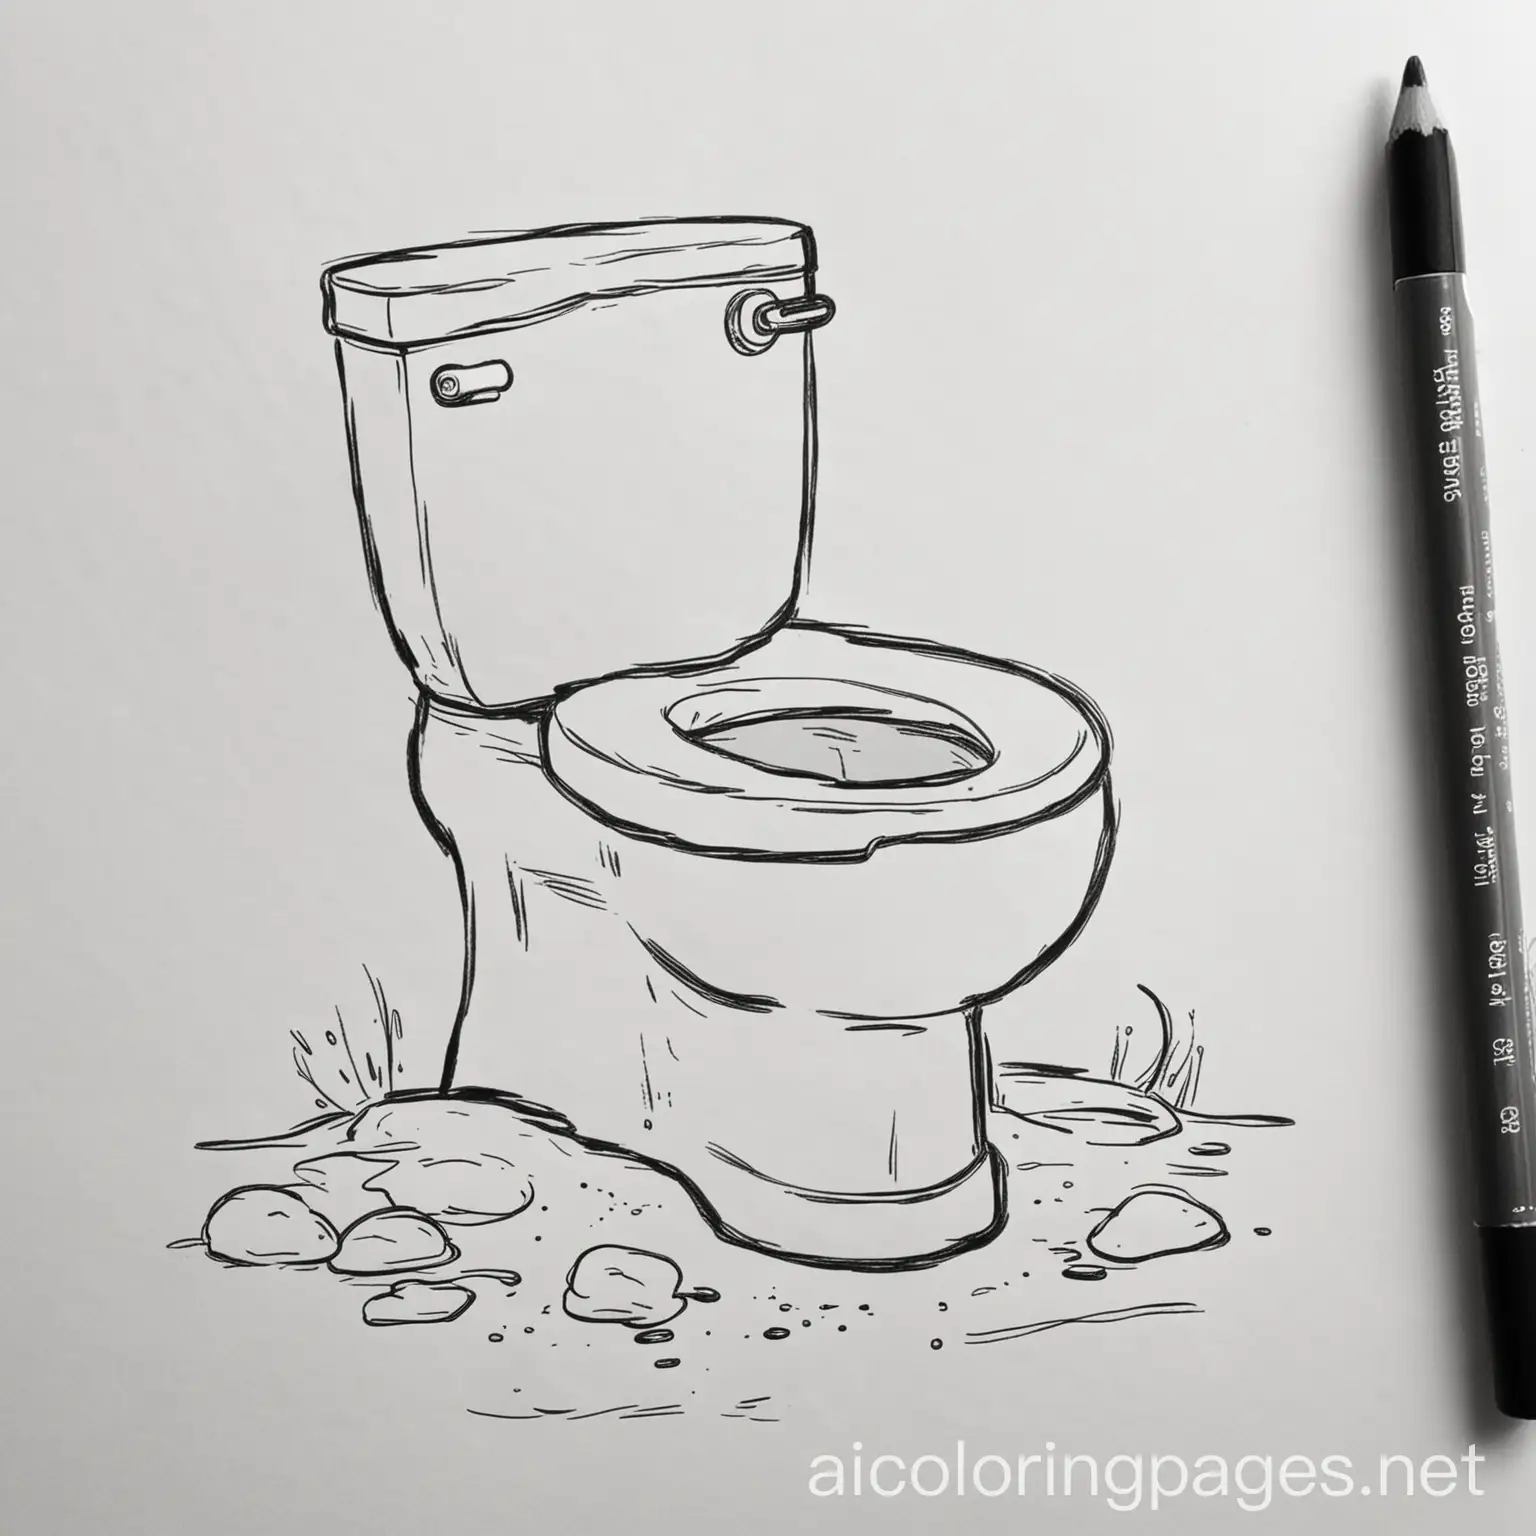 Childrens-Coloring-Page-Potty-with-Playful-Bathroom-Elements